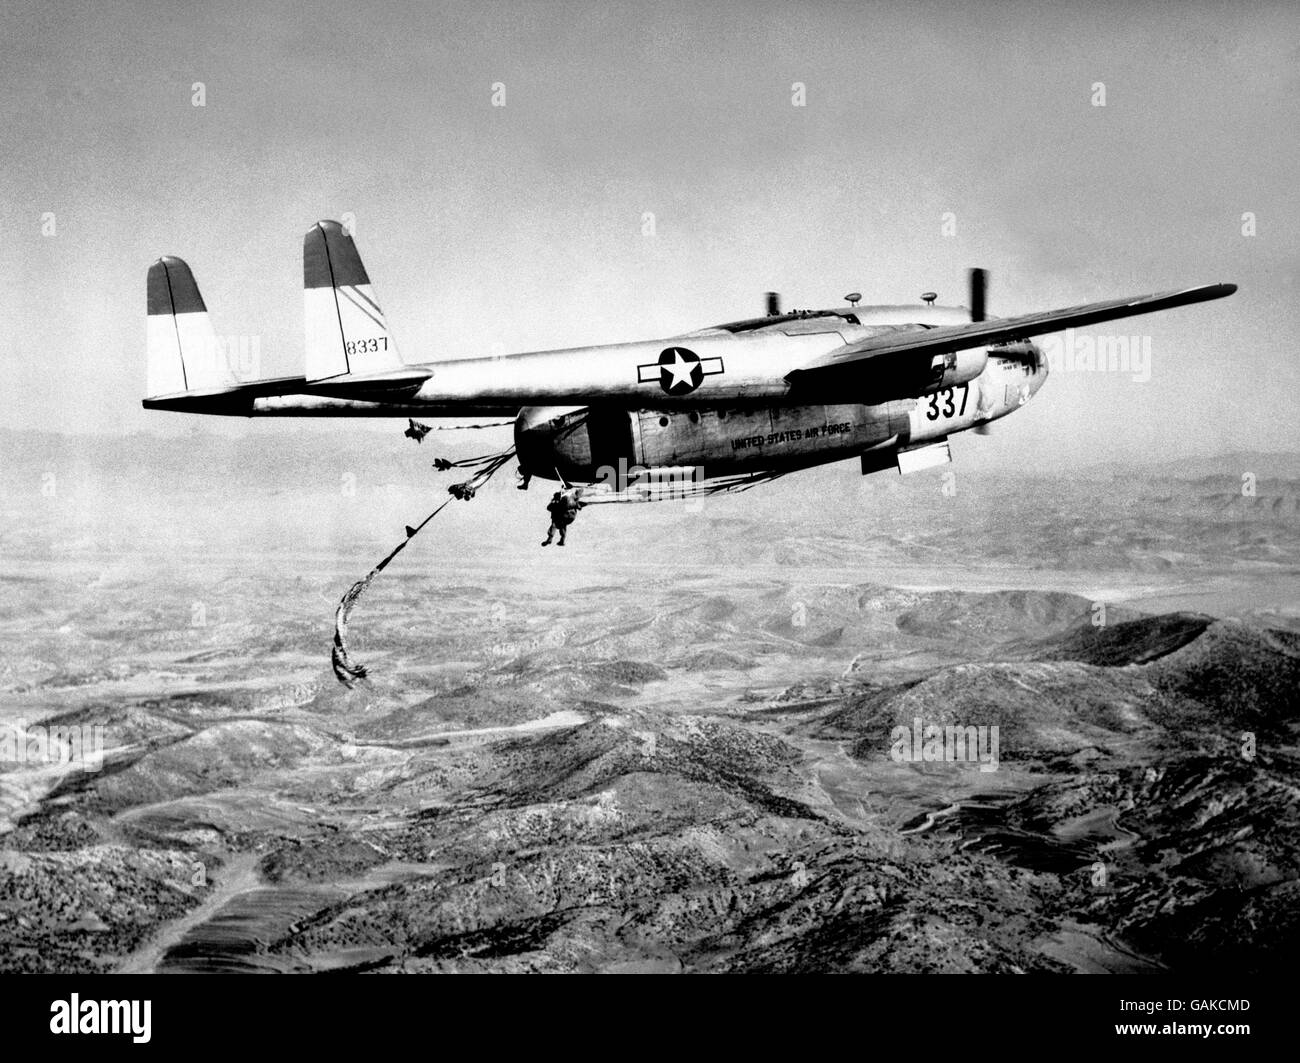 Flying over hills somewhere in Korea, this US Far East Air Forces C-119 Packet aircraft dropped troops and equipment. The aircraft no.337 of the 315th Air Division (Combat Cargo) was one of the many used in a giant air-drop north-wesr of Seoul to cut off the communist troops as they retreated into North Korea. Stock Photo